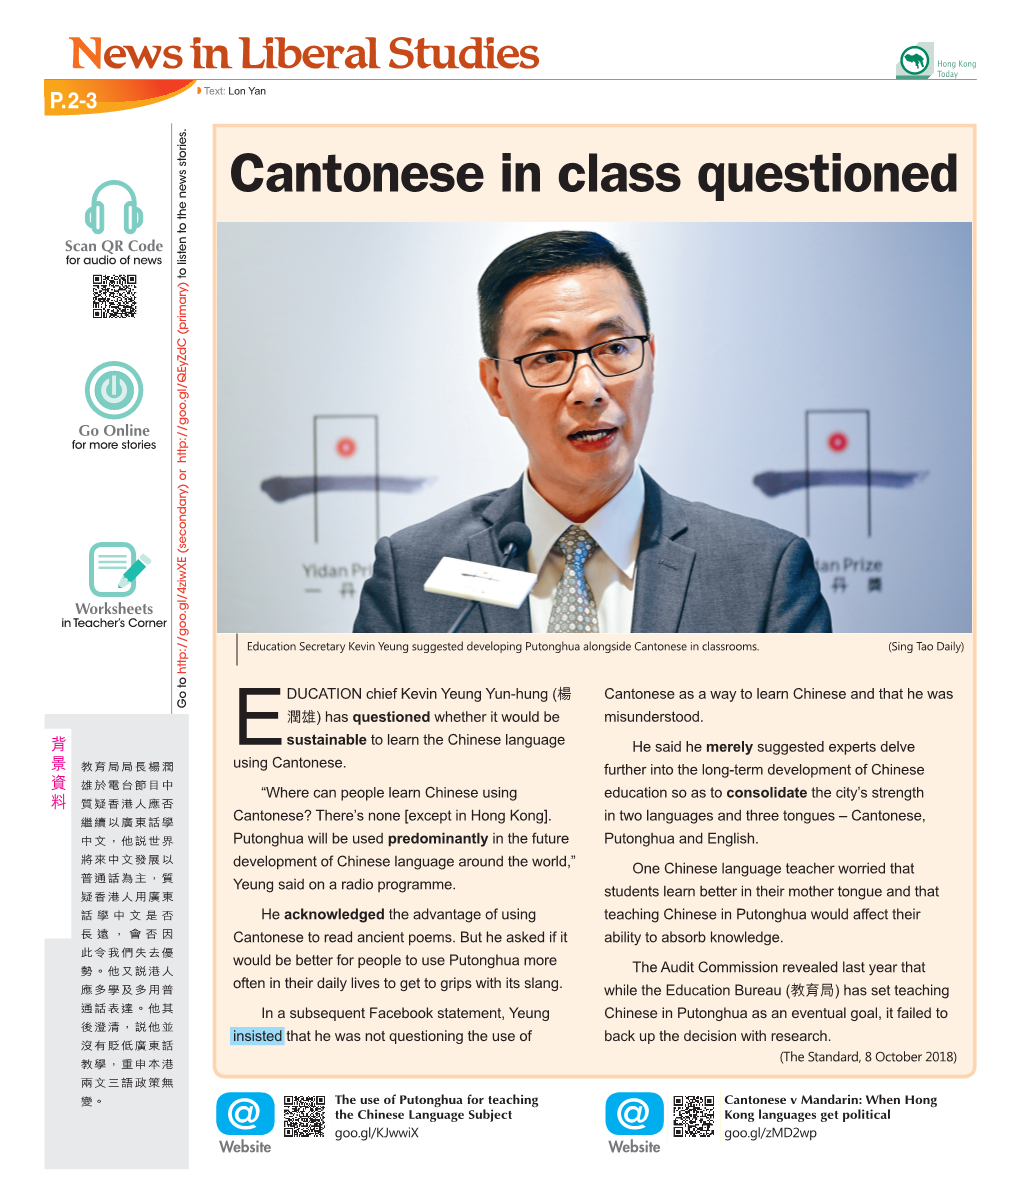 Cantonese in Class Questioned